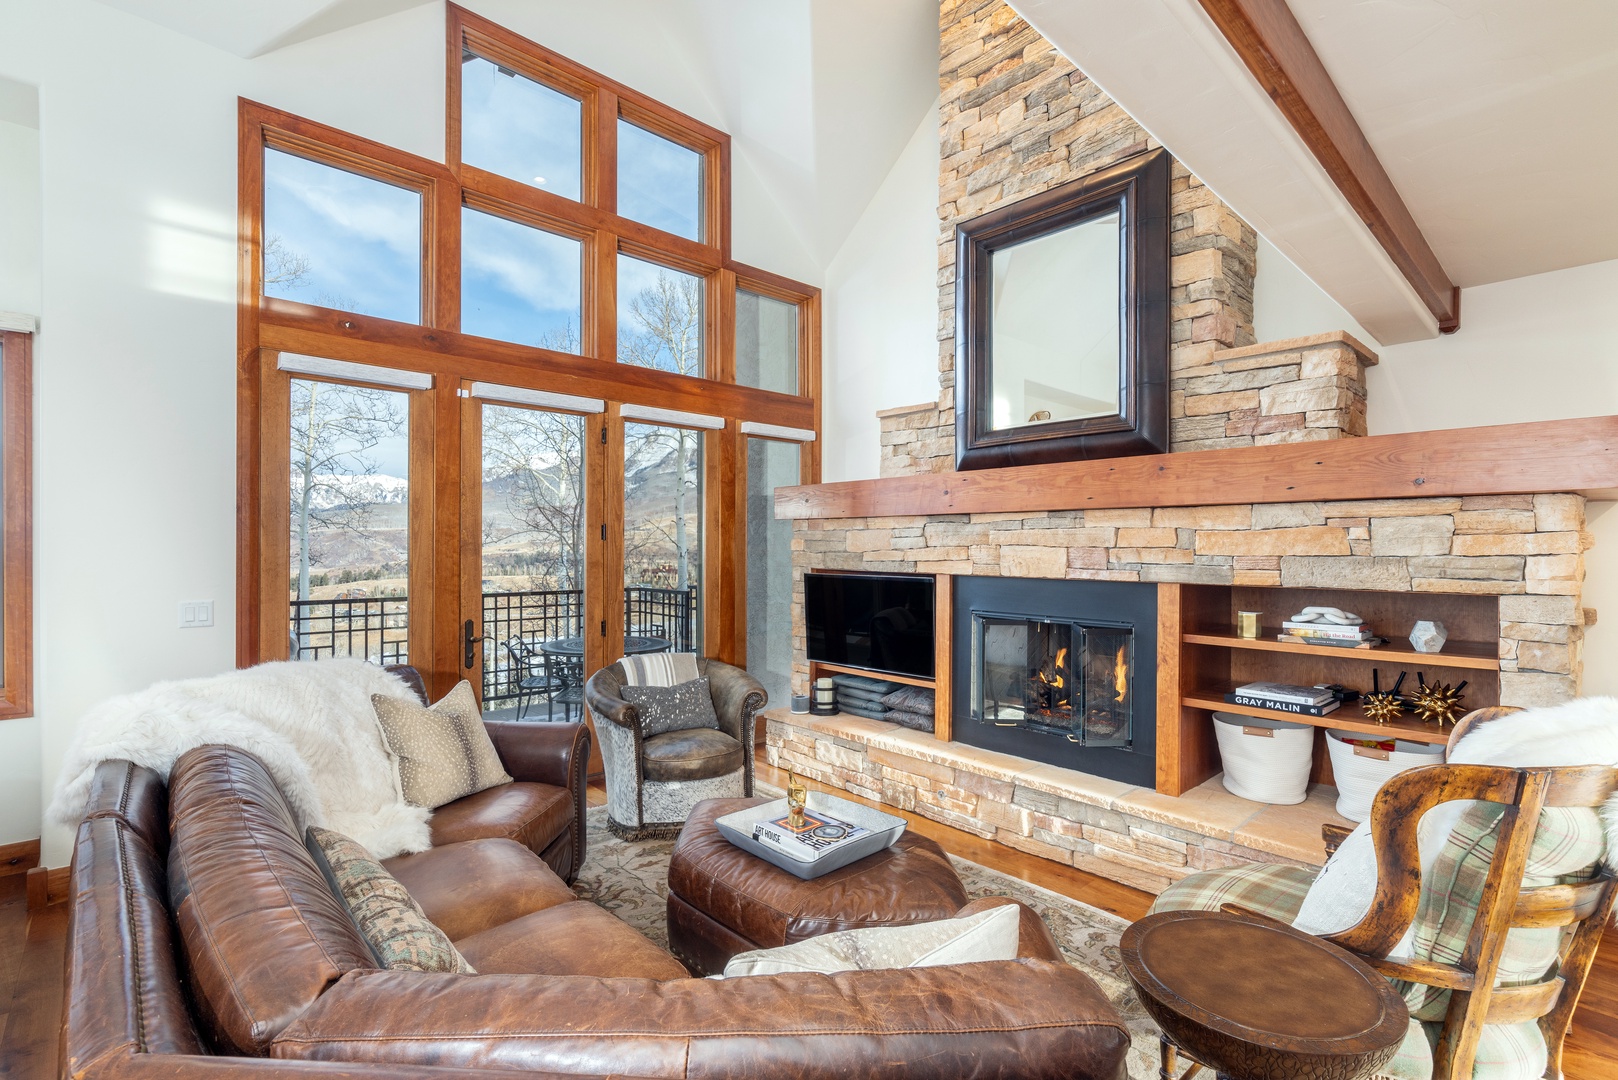 Stylish and cozy with views for days by Curate Telluride